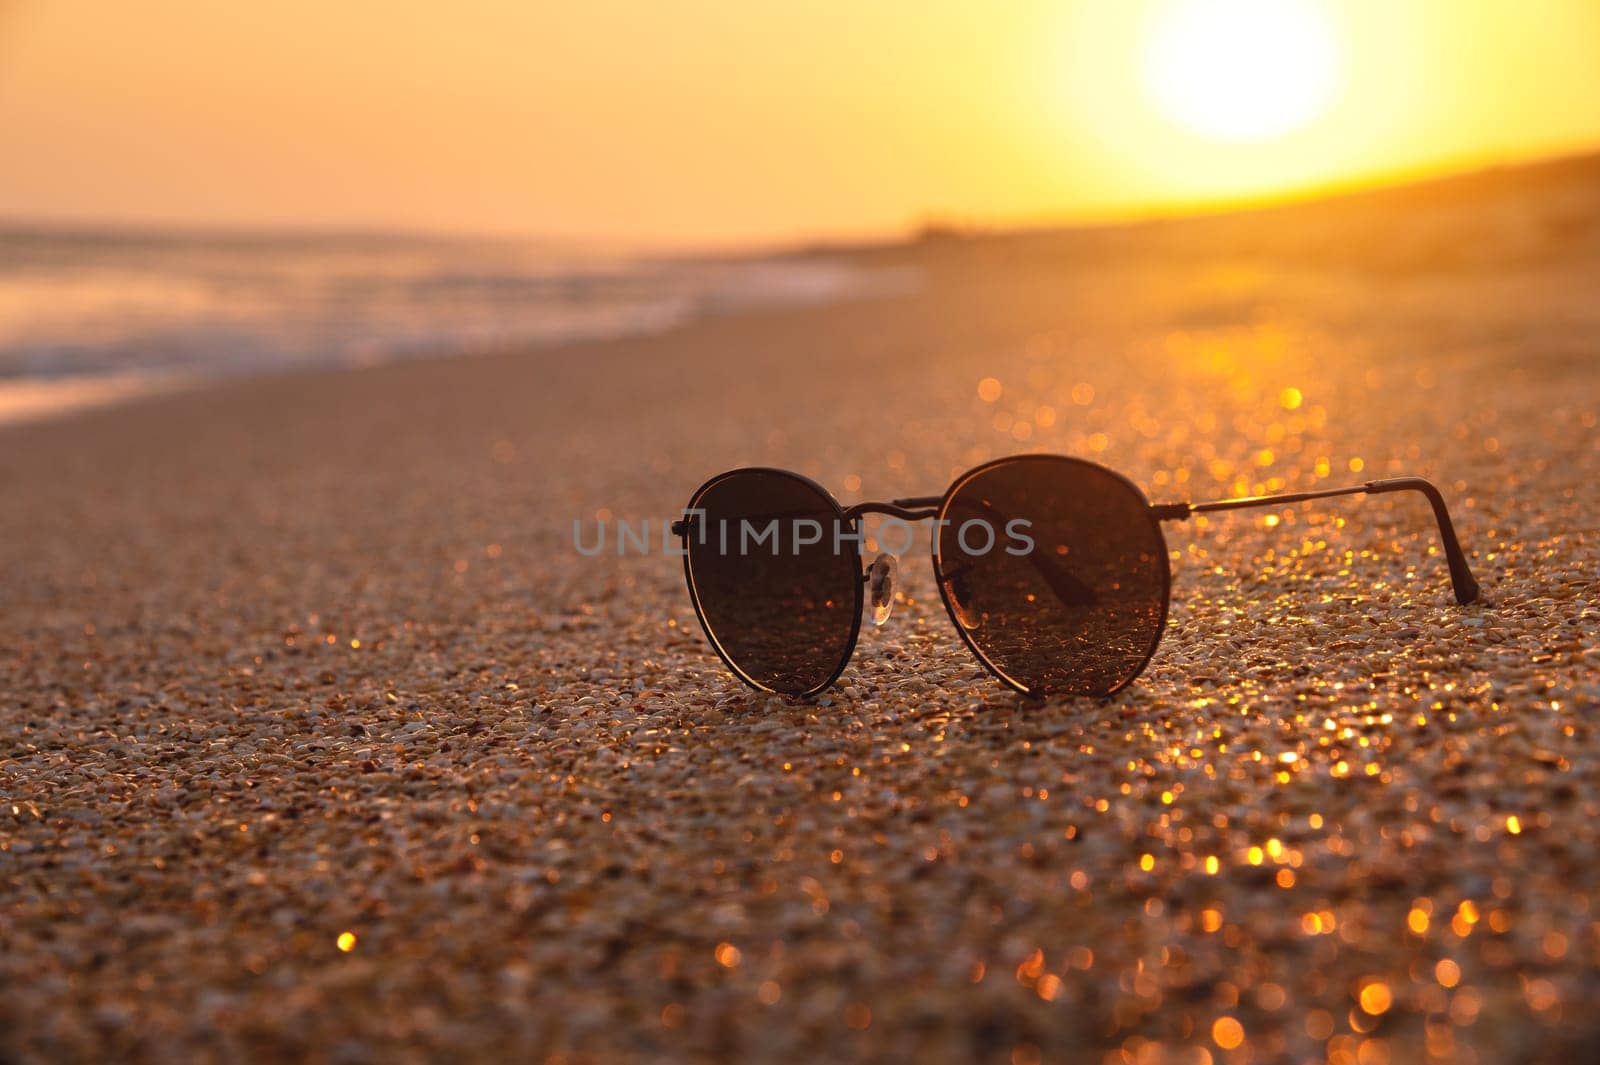 Sunglasses on the beach, lie on the sandy sand at sunset. Concept of beach holiday, serenity.